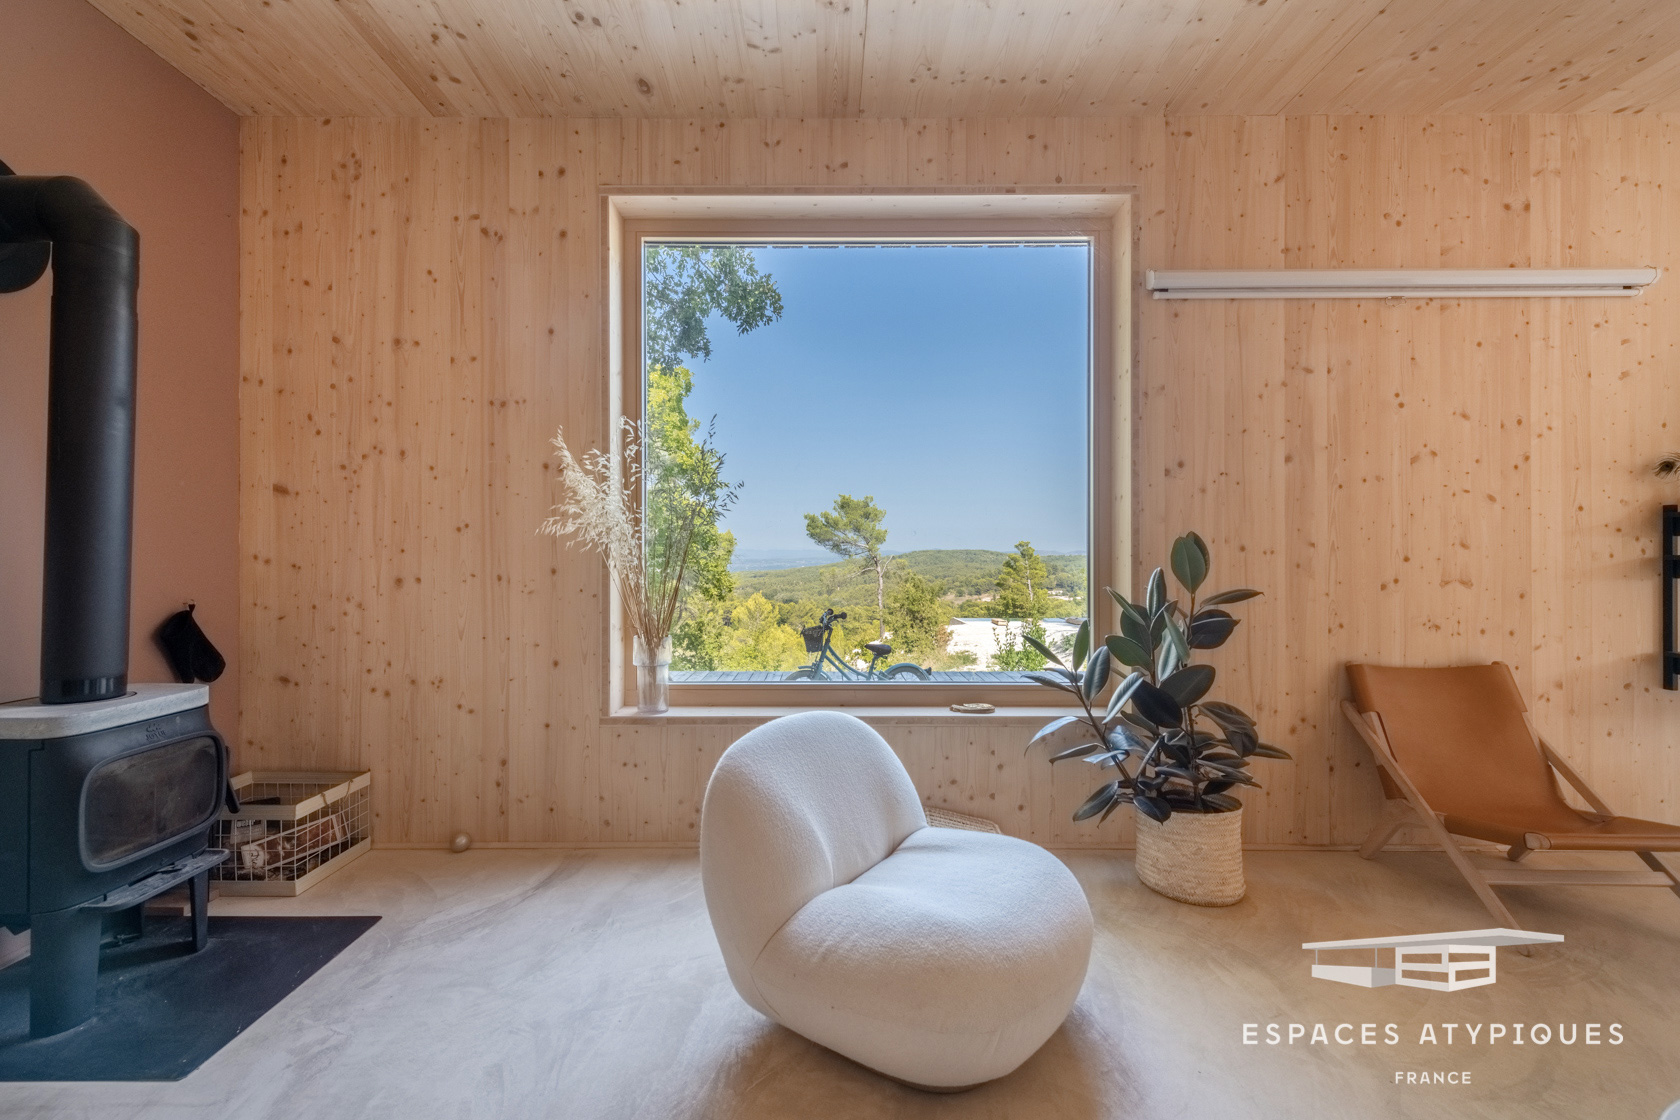 A Shou Sugi Ban country cabin asks for €1.2m in France's Aix-en-Provence